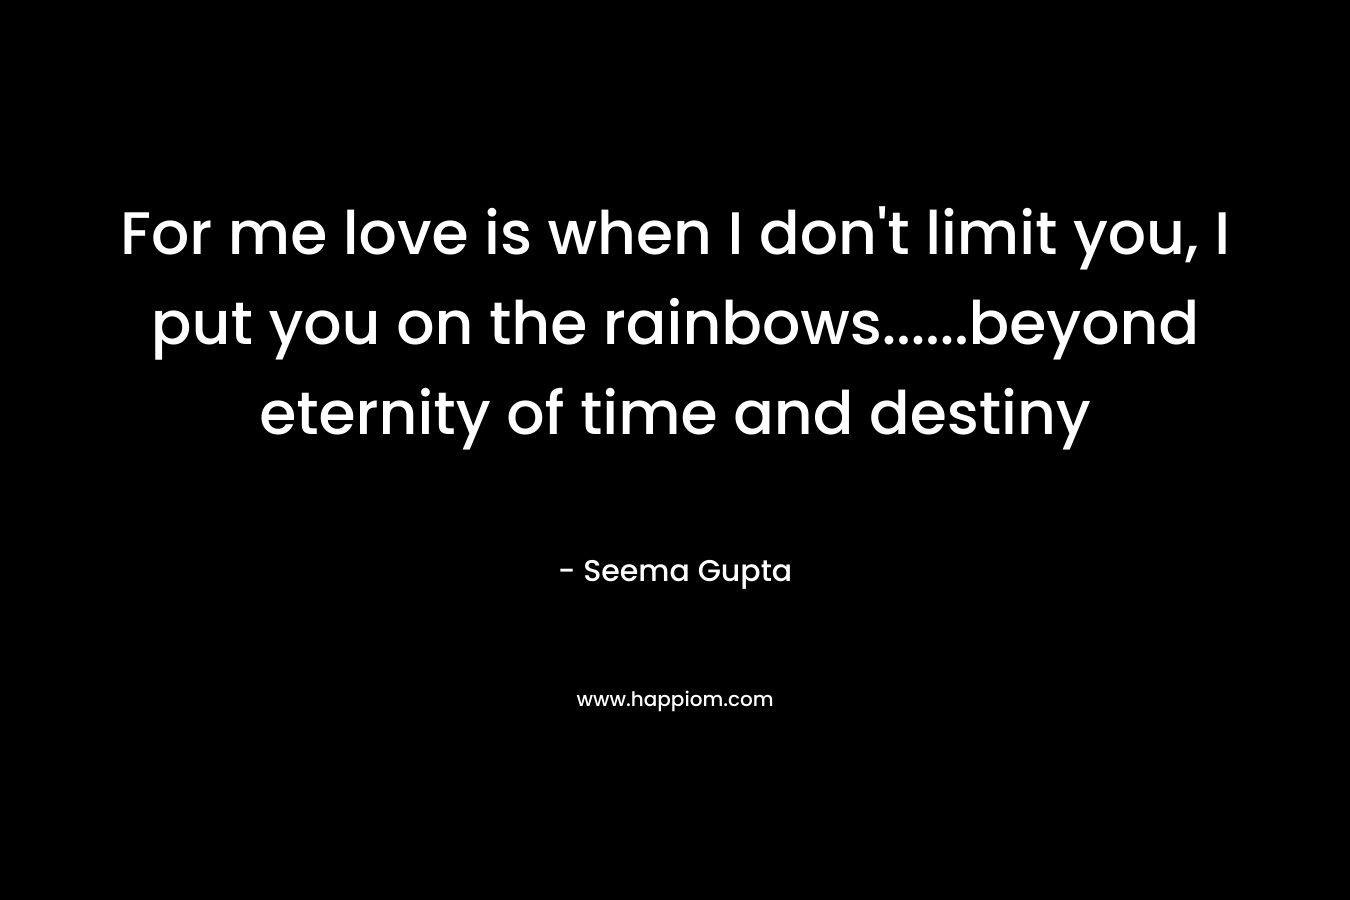 For me love is when I don't limit you, I put you on the rainbows......beyond eternity of time and destiny 